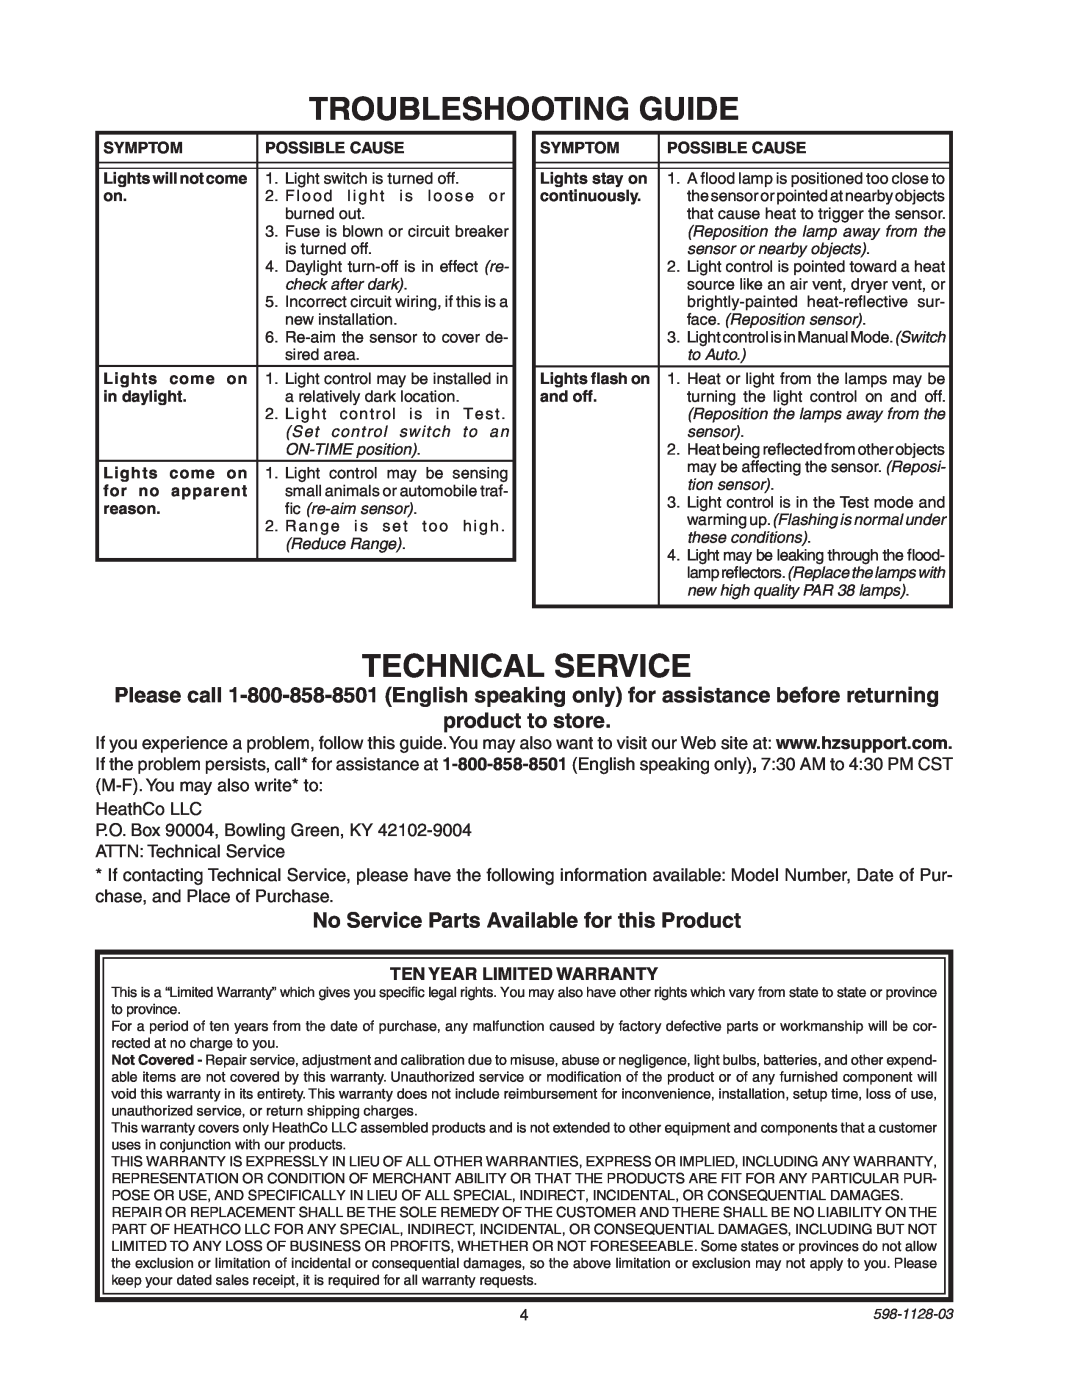 Heath Zenith SL-5411-WH manual Troubleshooting Guide, Technical Service, product to store 